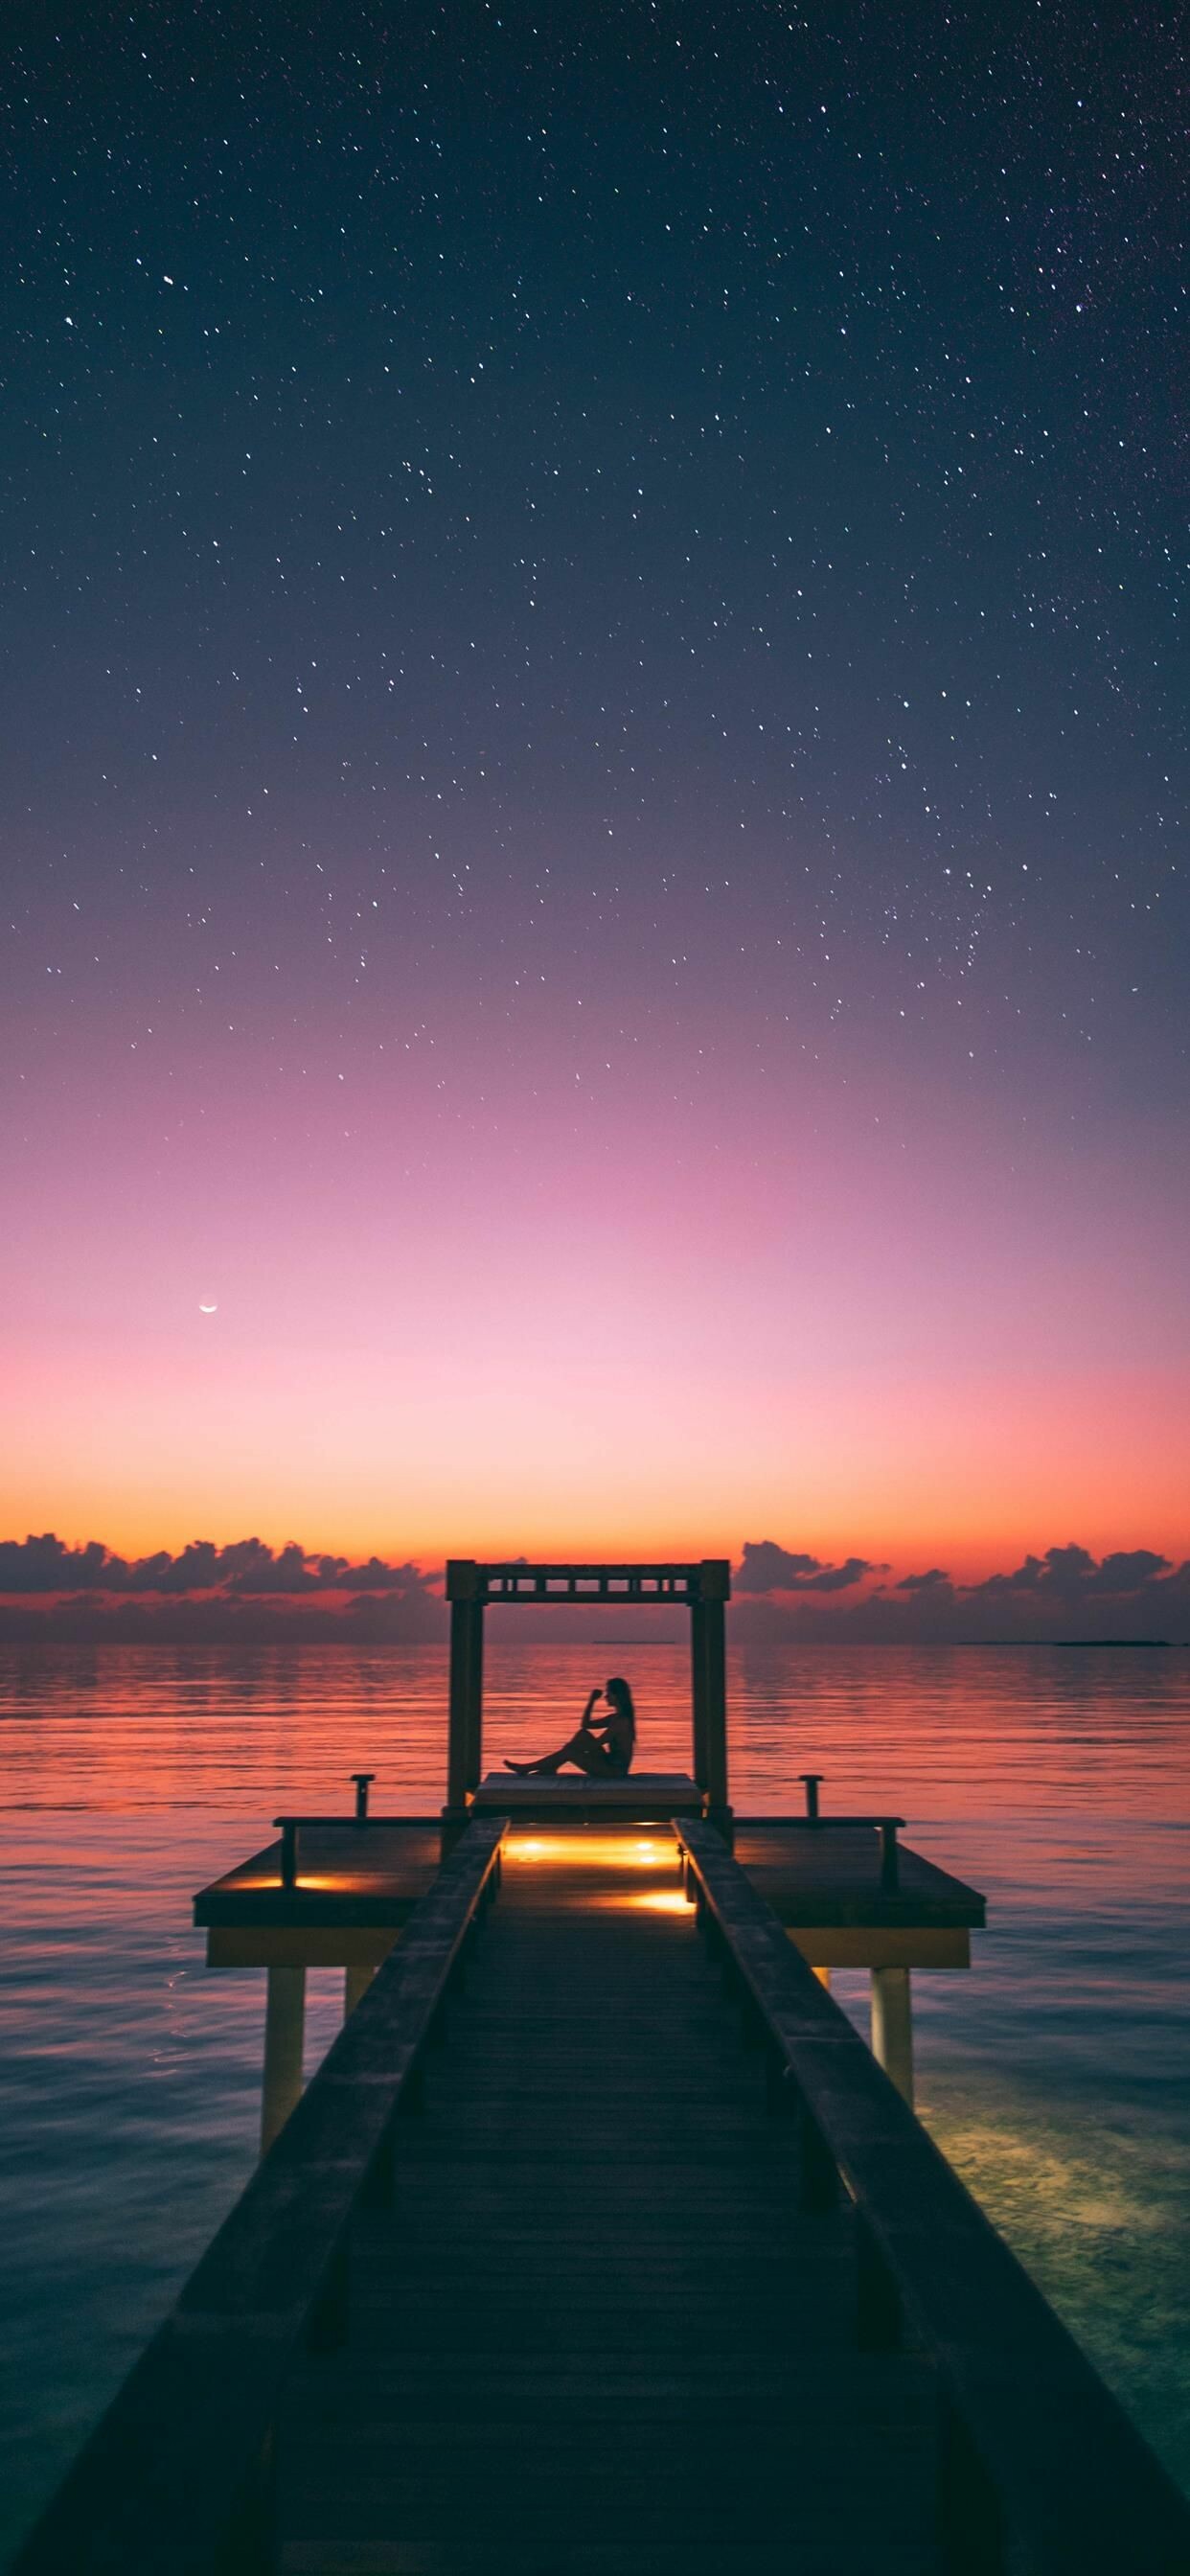 Maldives: An island nation in the Indian Ocean, Sunset. 1250x2690 HD Wallpaper.